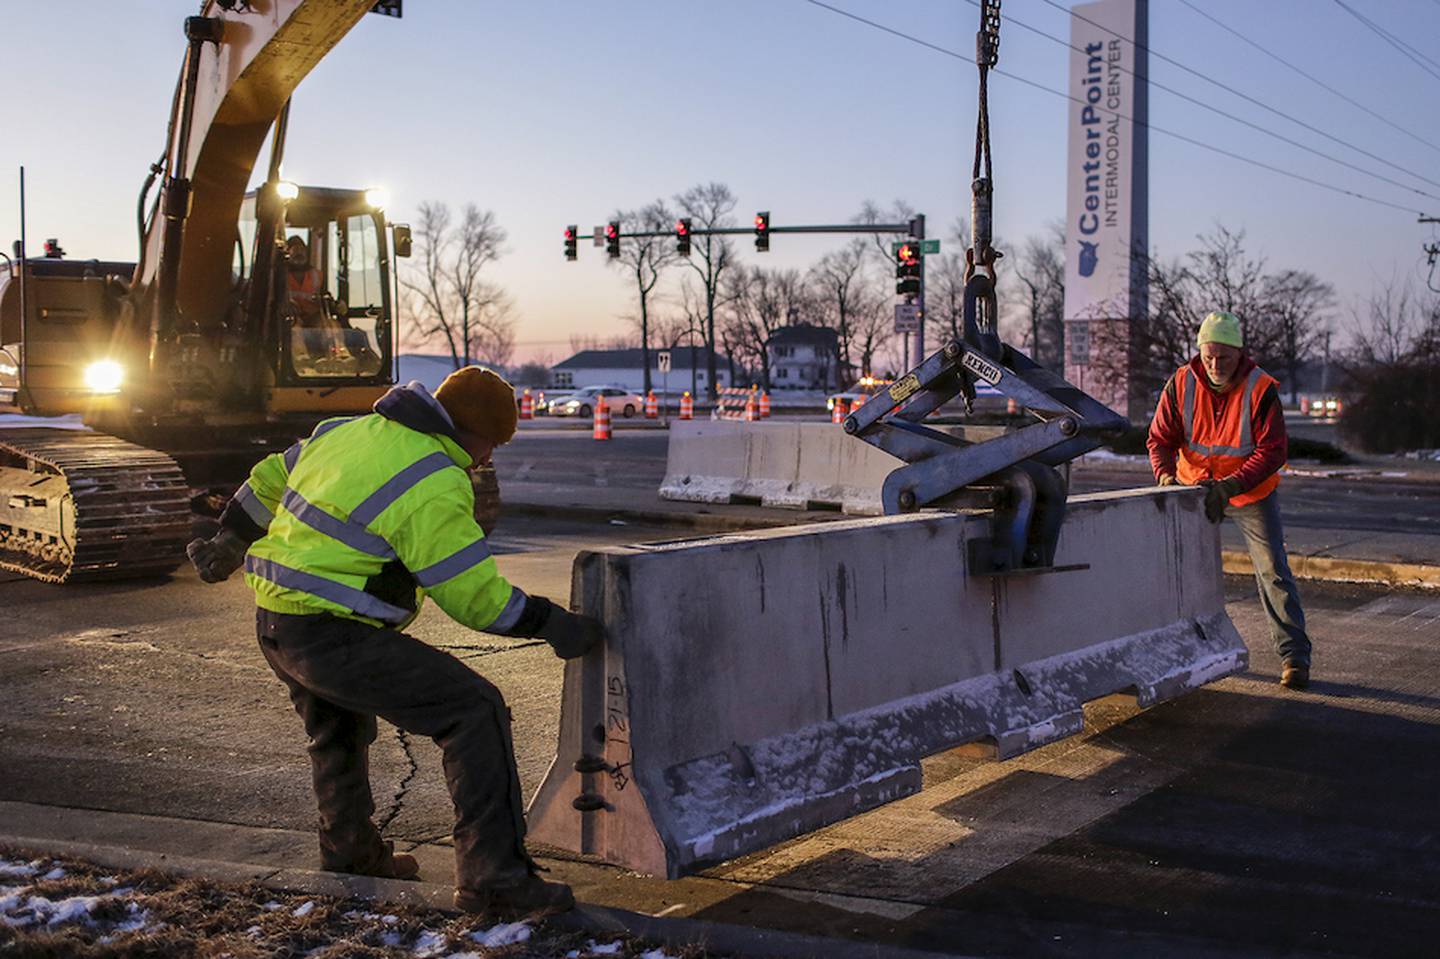 A crew works Wednesday morning to close of access to Walter Strawn Drive from state Route 53 in Elwood. The closure of the road comes as a result of a ruling by the Illinois Commerce Commission that said a railroad crossing is too dangerous to remain open.